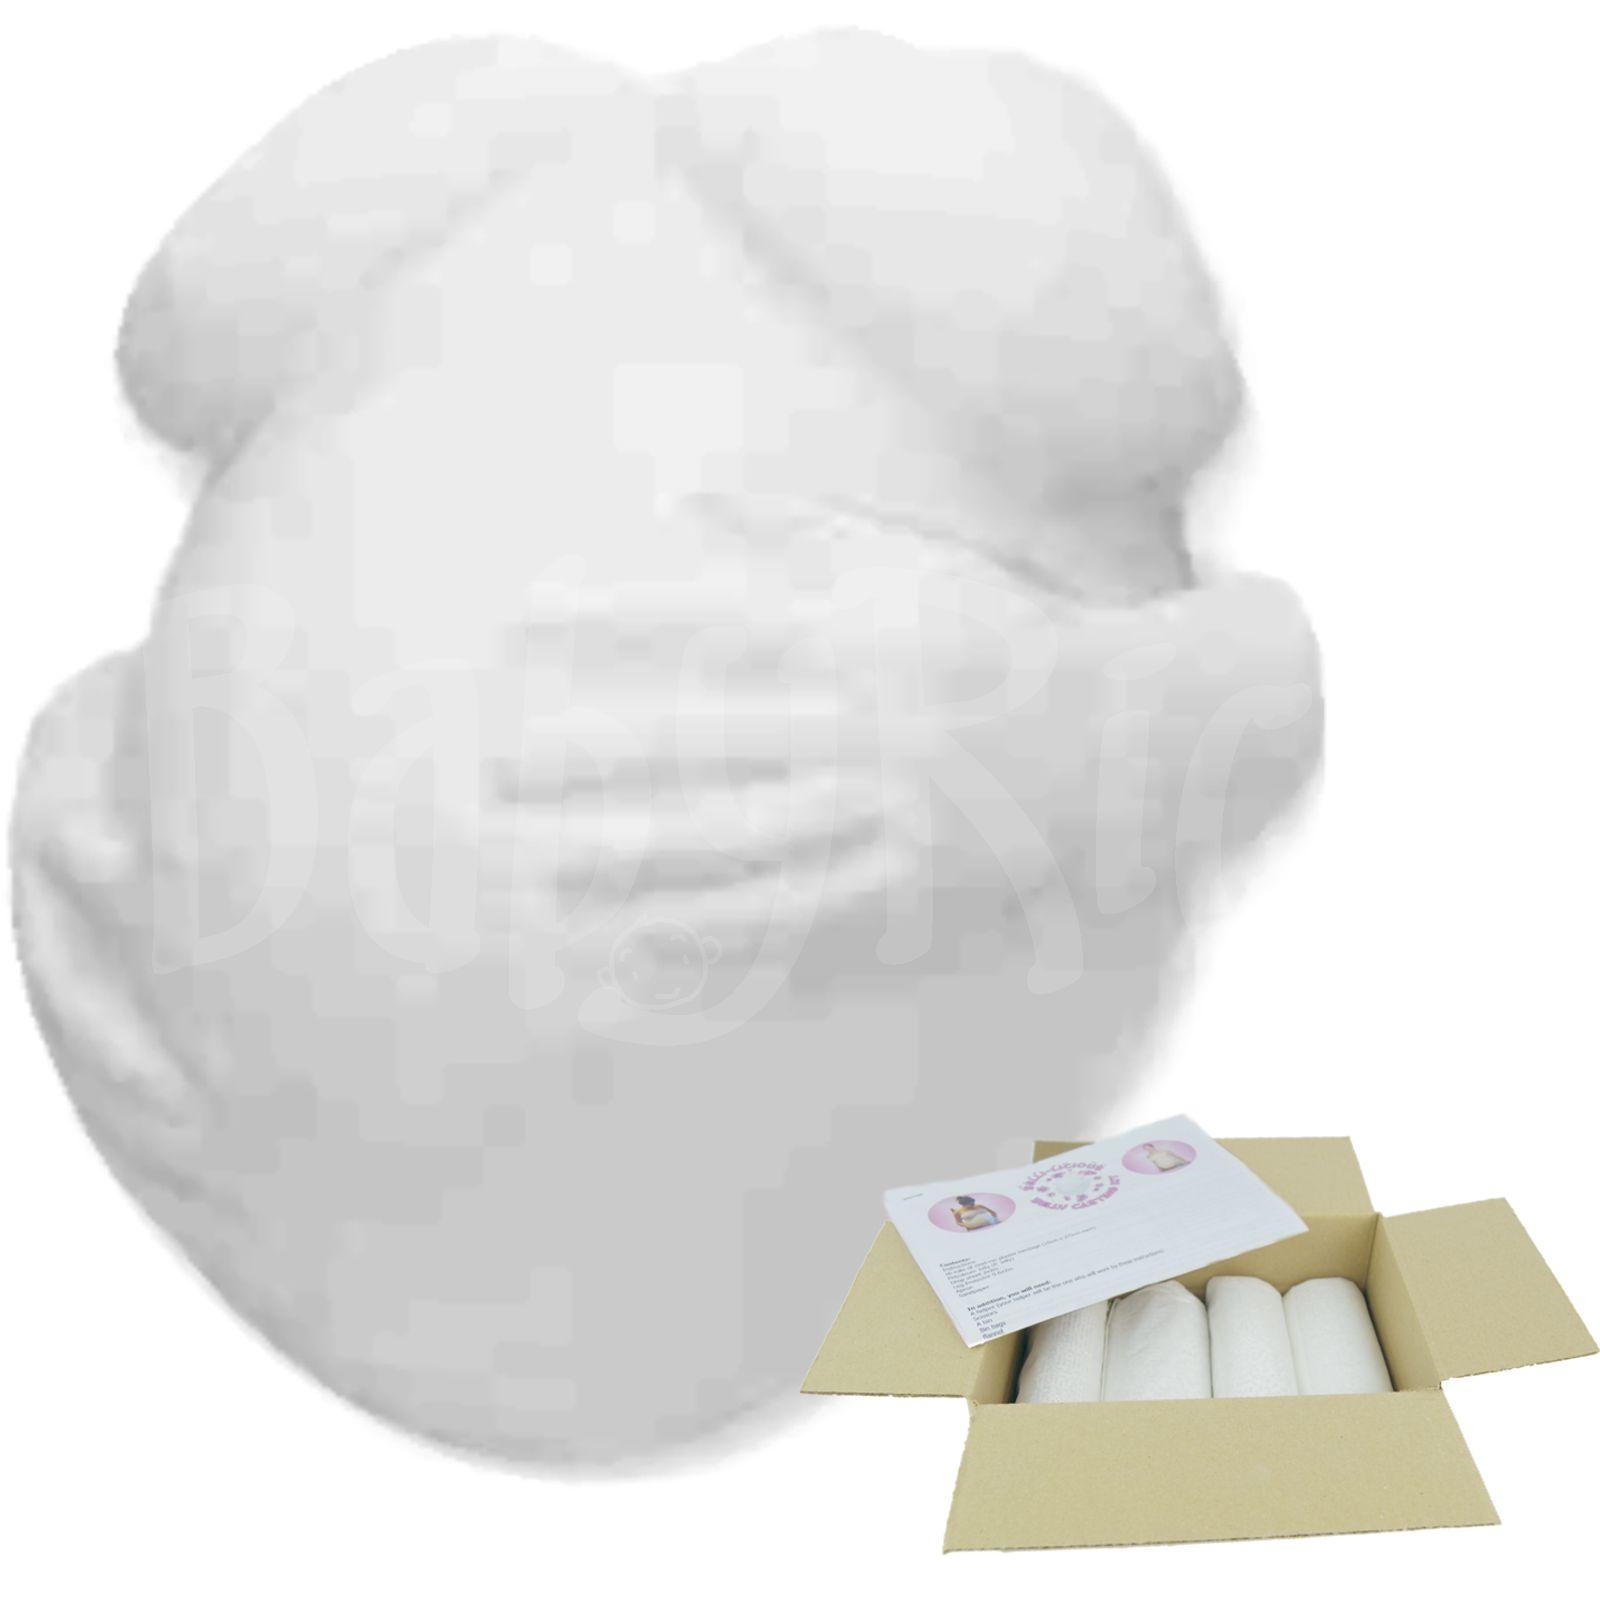 Belly Casting Kit Pregnancy Bump Plaster Cast Set of 4 Bandages and Instructions by BabyRice